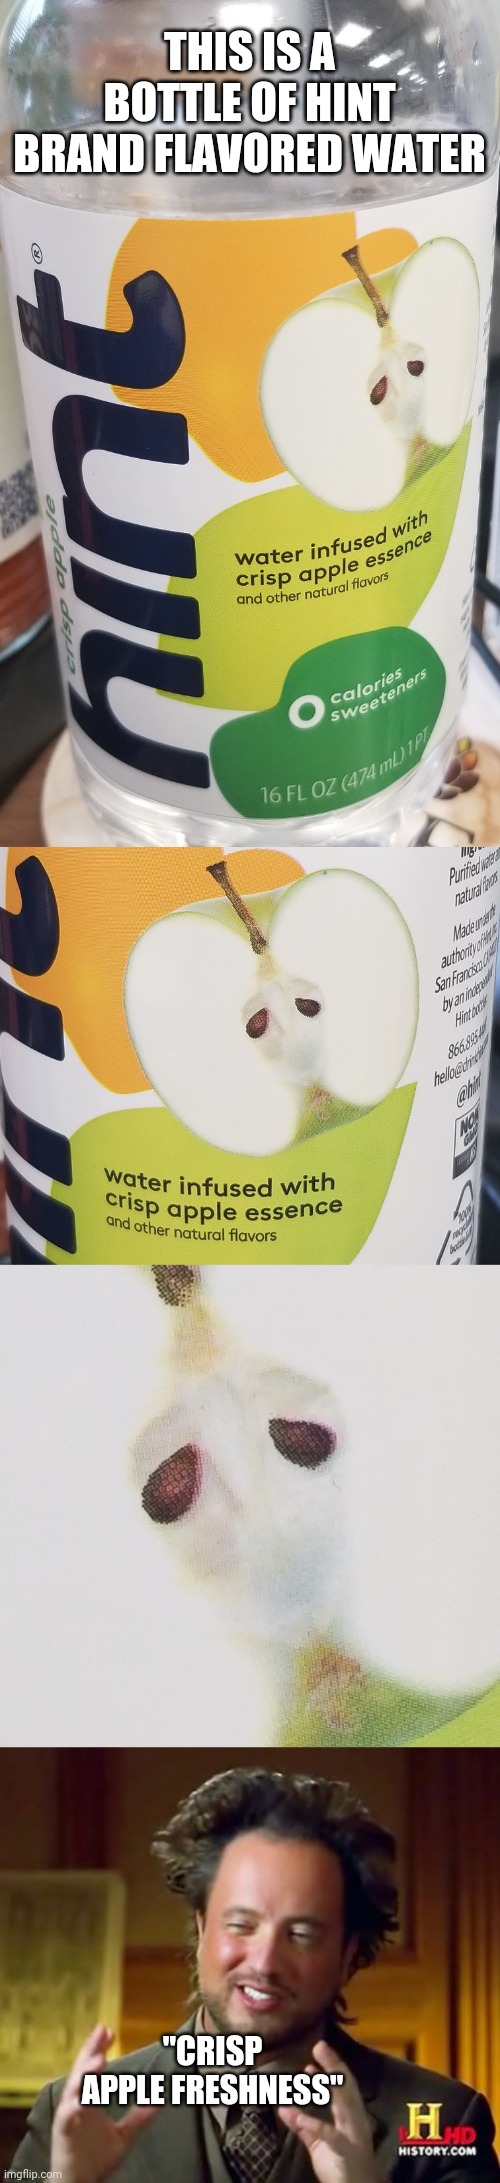 Aliens? | THIS IS A BOTTLE OF HINT BRAND FLAVORED WATER; "CRISP APPLE FRESHNESS" | image tagged in memes,ancient aliens,hint | made w/ Imgflip meme maker